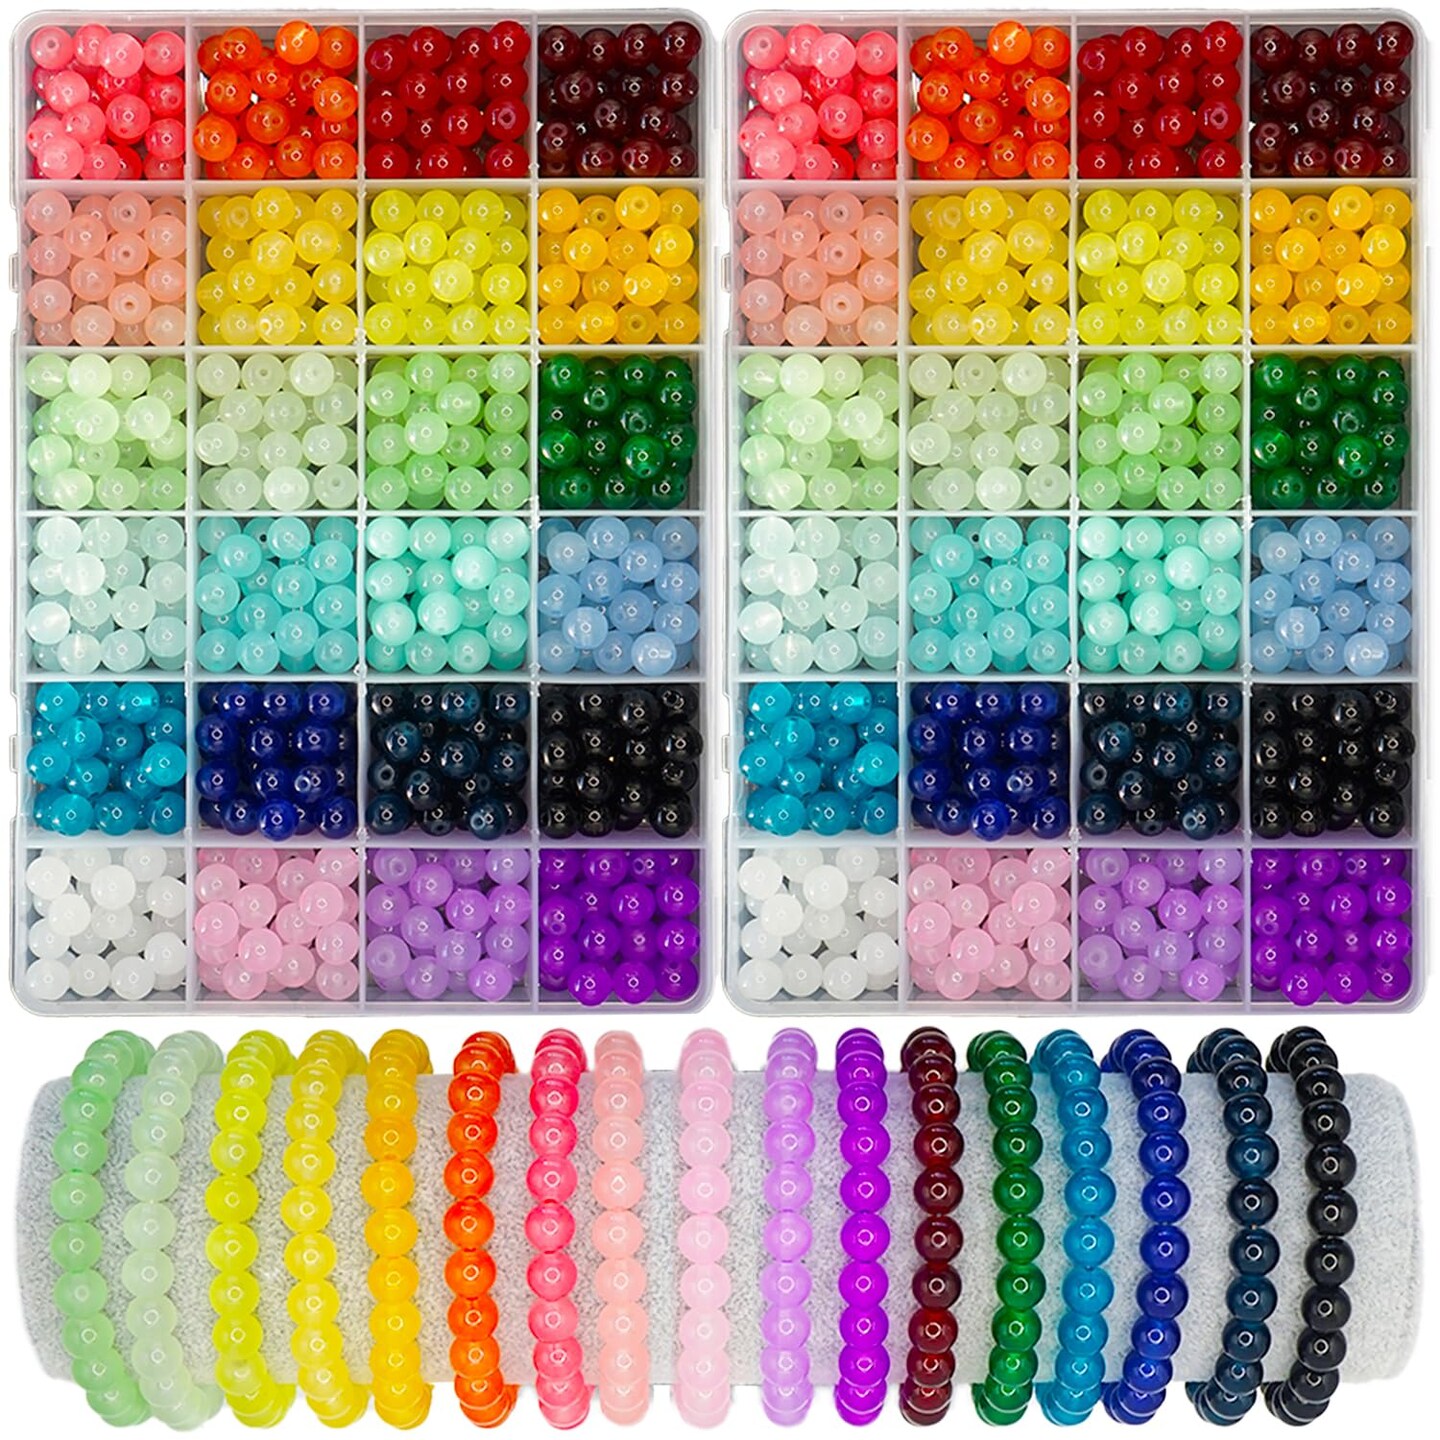 Gaspletu 1400PCS Glass Beads for Jewelry Making, 24 Colors 8mm Crystal Beads Bracelets Making Kit, 2 Box Round Beads Suitable for Beginners